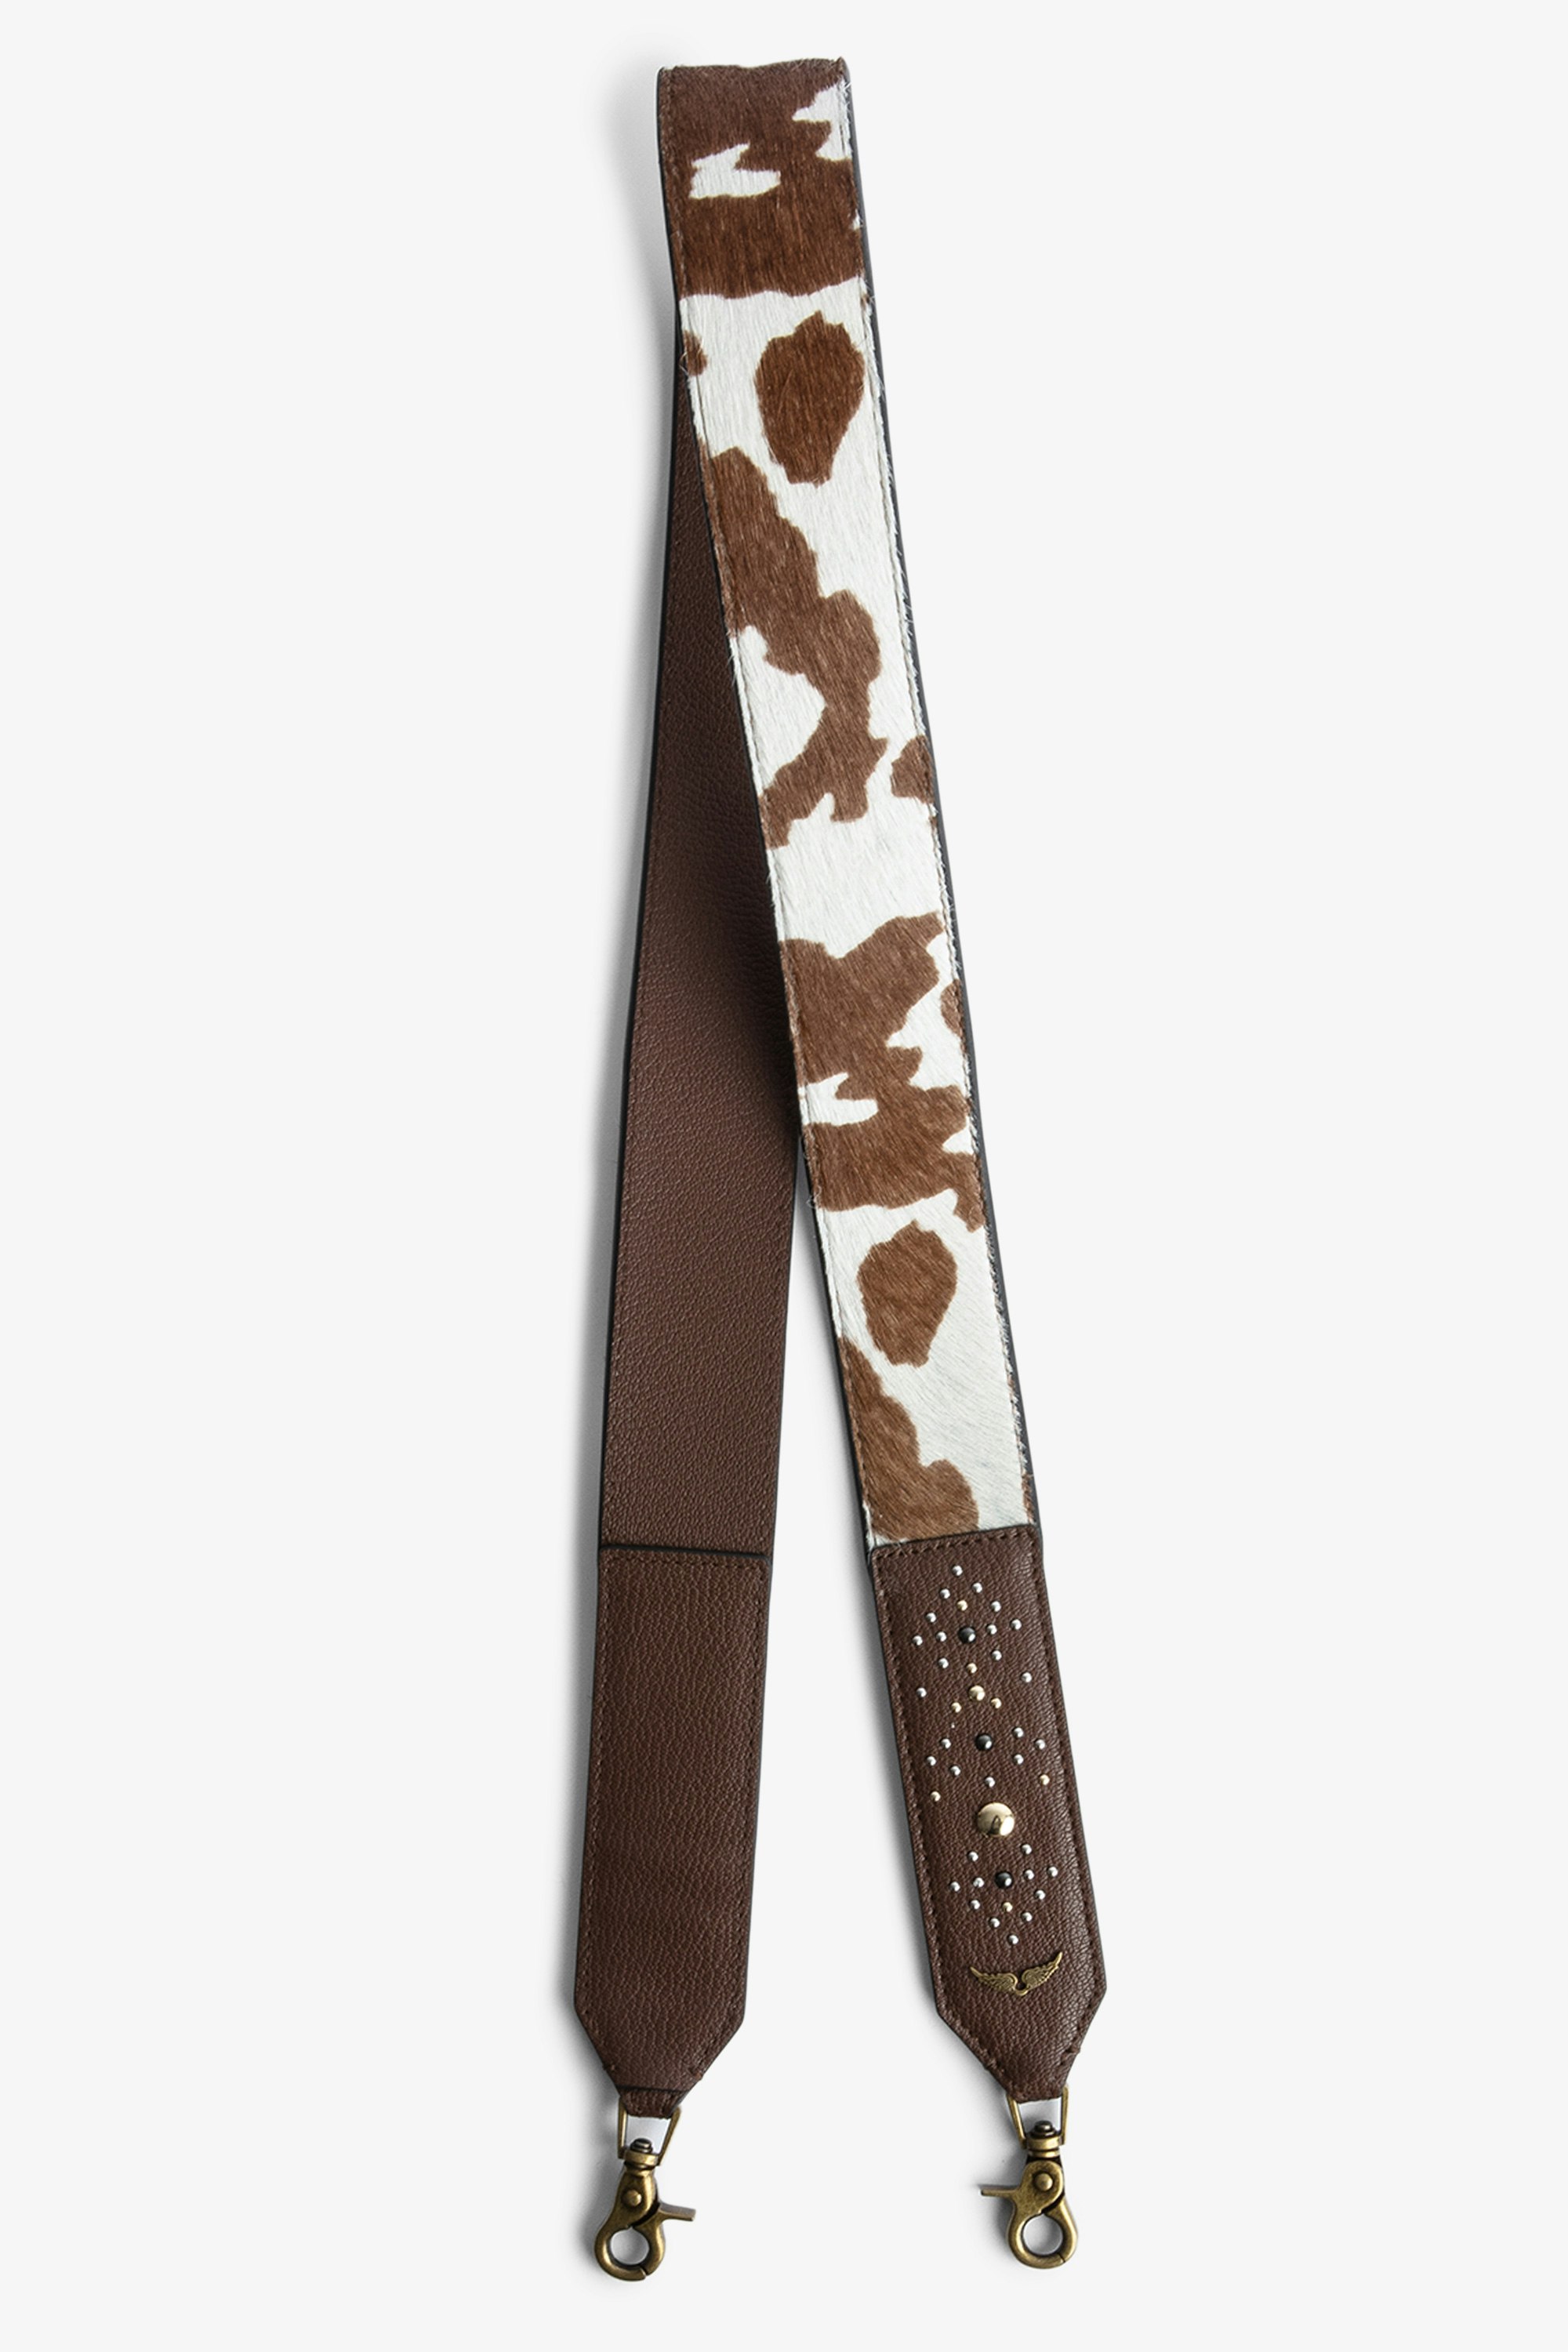 Zadig Shoulder Strap Women’s shoulder strap in brown-and-white pony-effect leather with studs